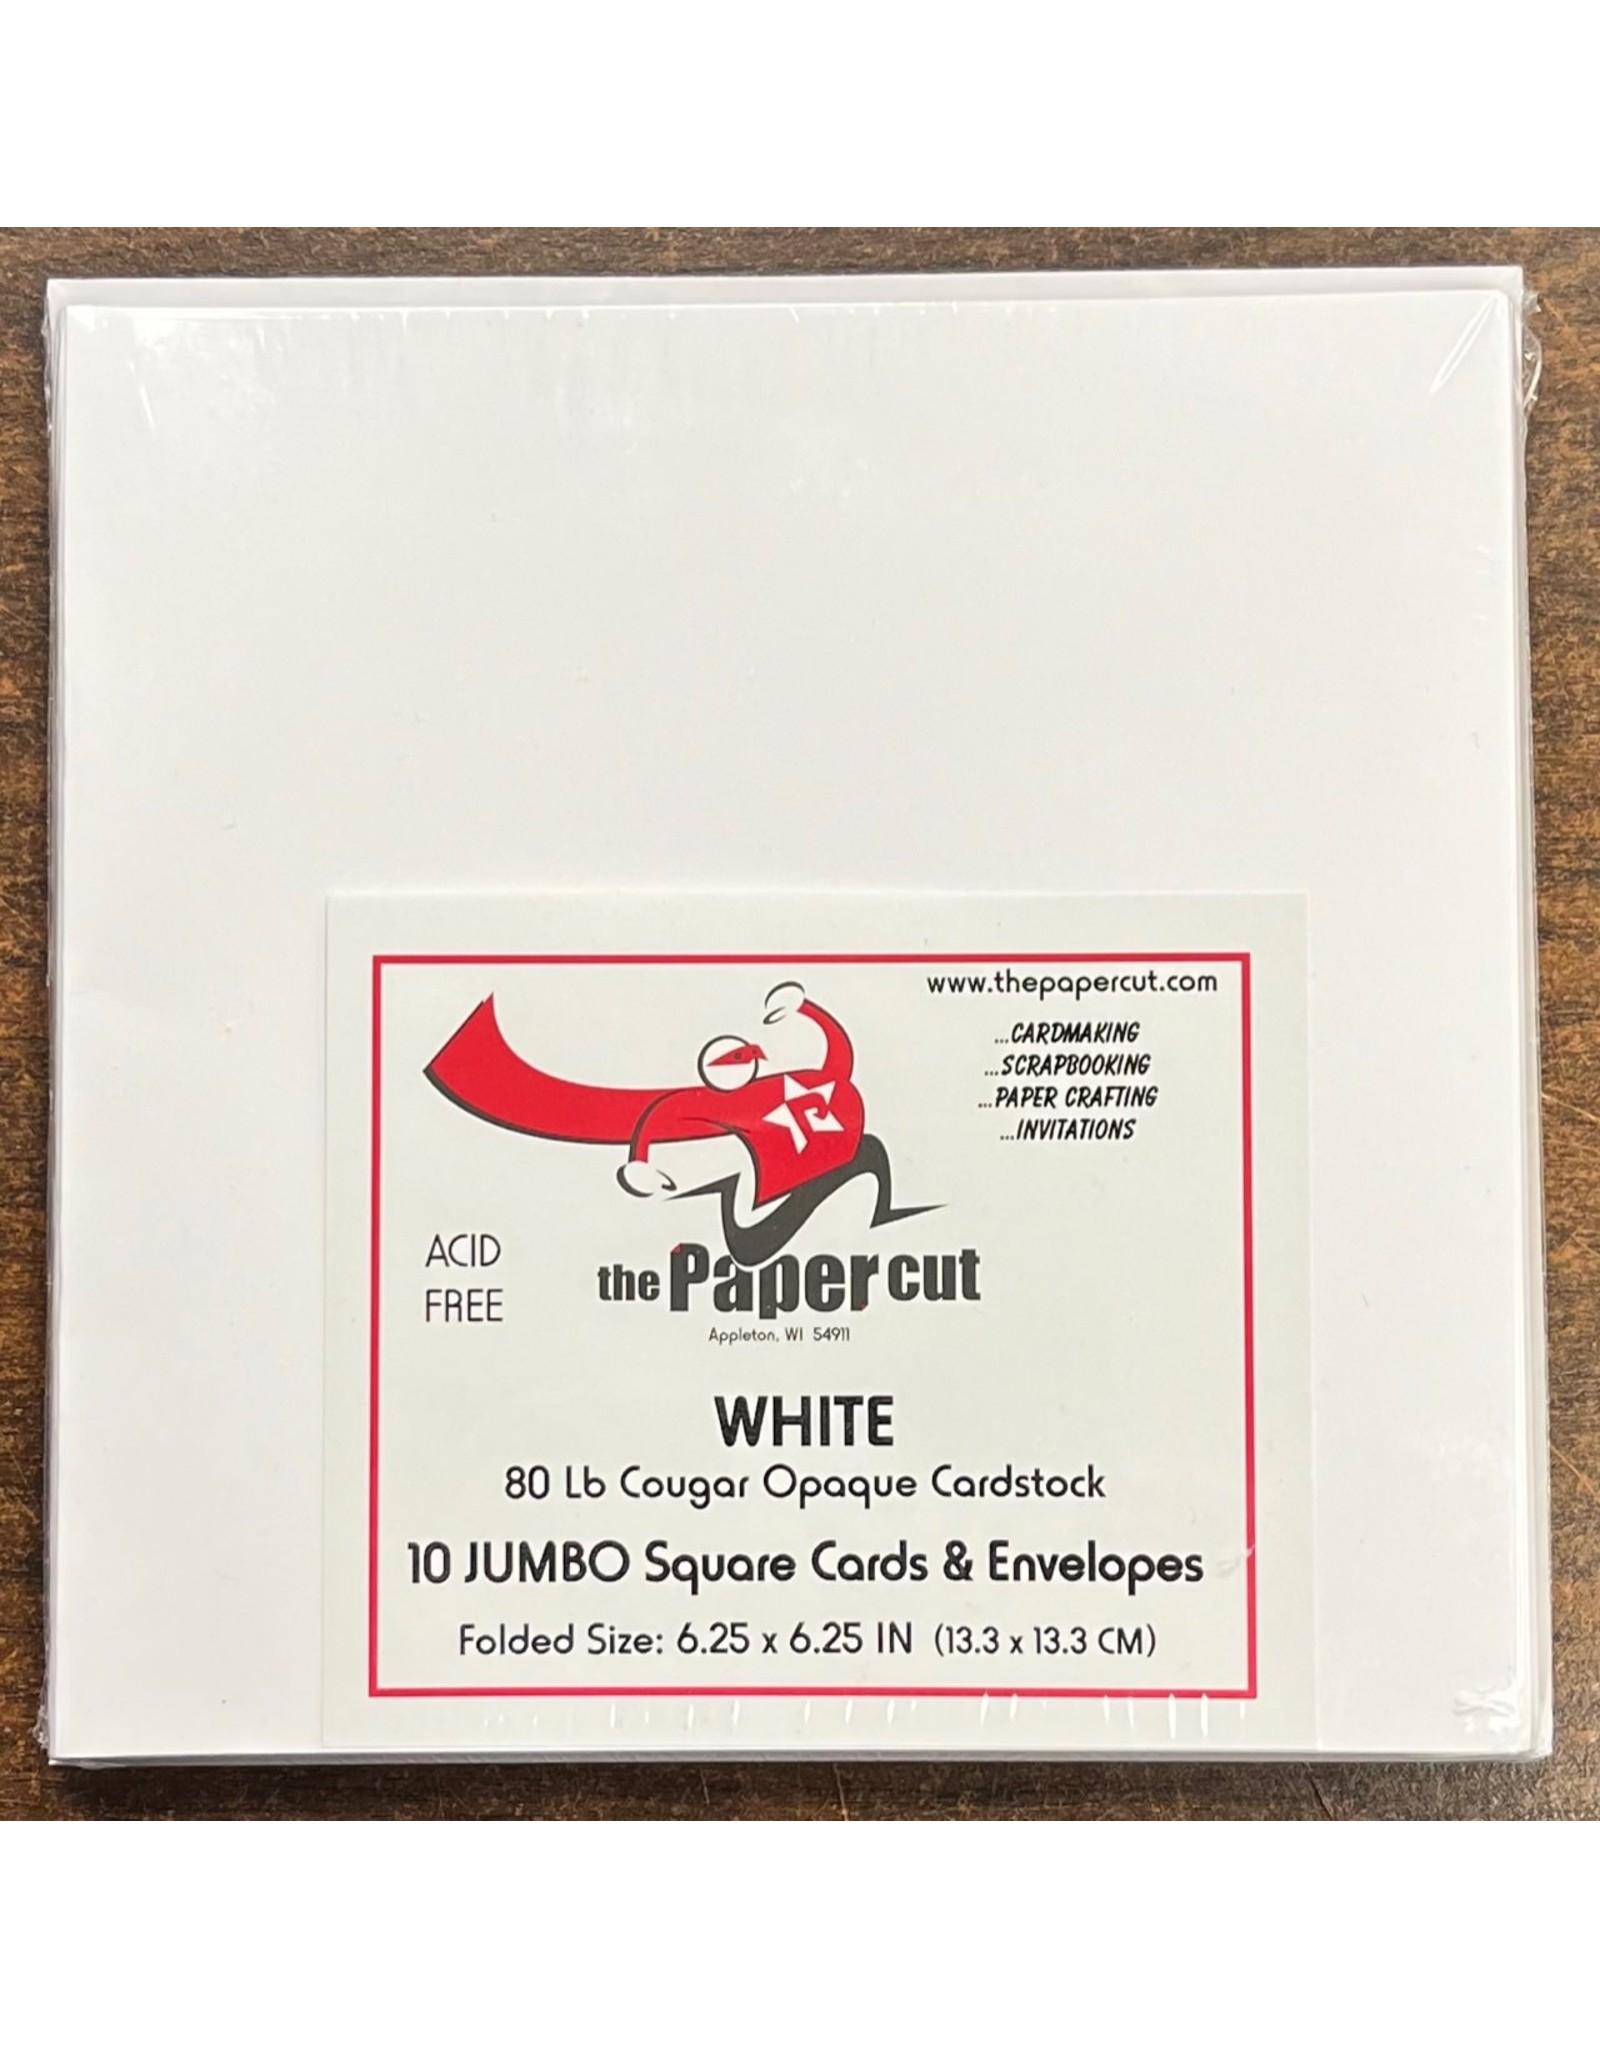 PAPER CUT THE PAPER CUT 10 JUMBO SQUARE WHITE COUGAR OPAQUE 80lb CARDS WITH ENVELOPES 6.25x6.25 FOLDED